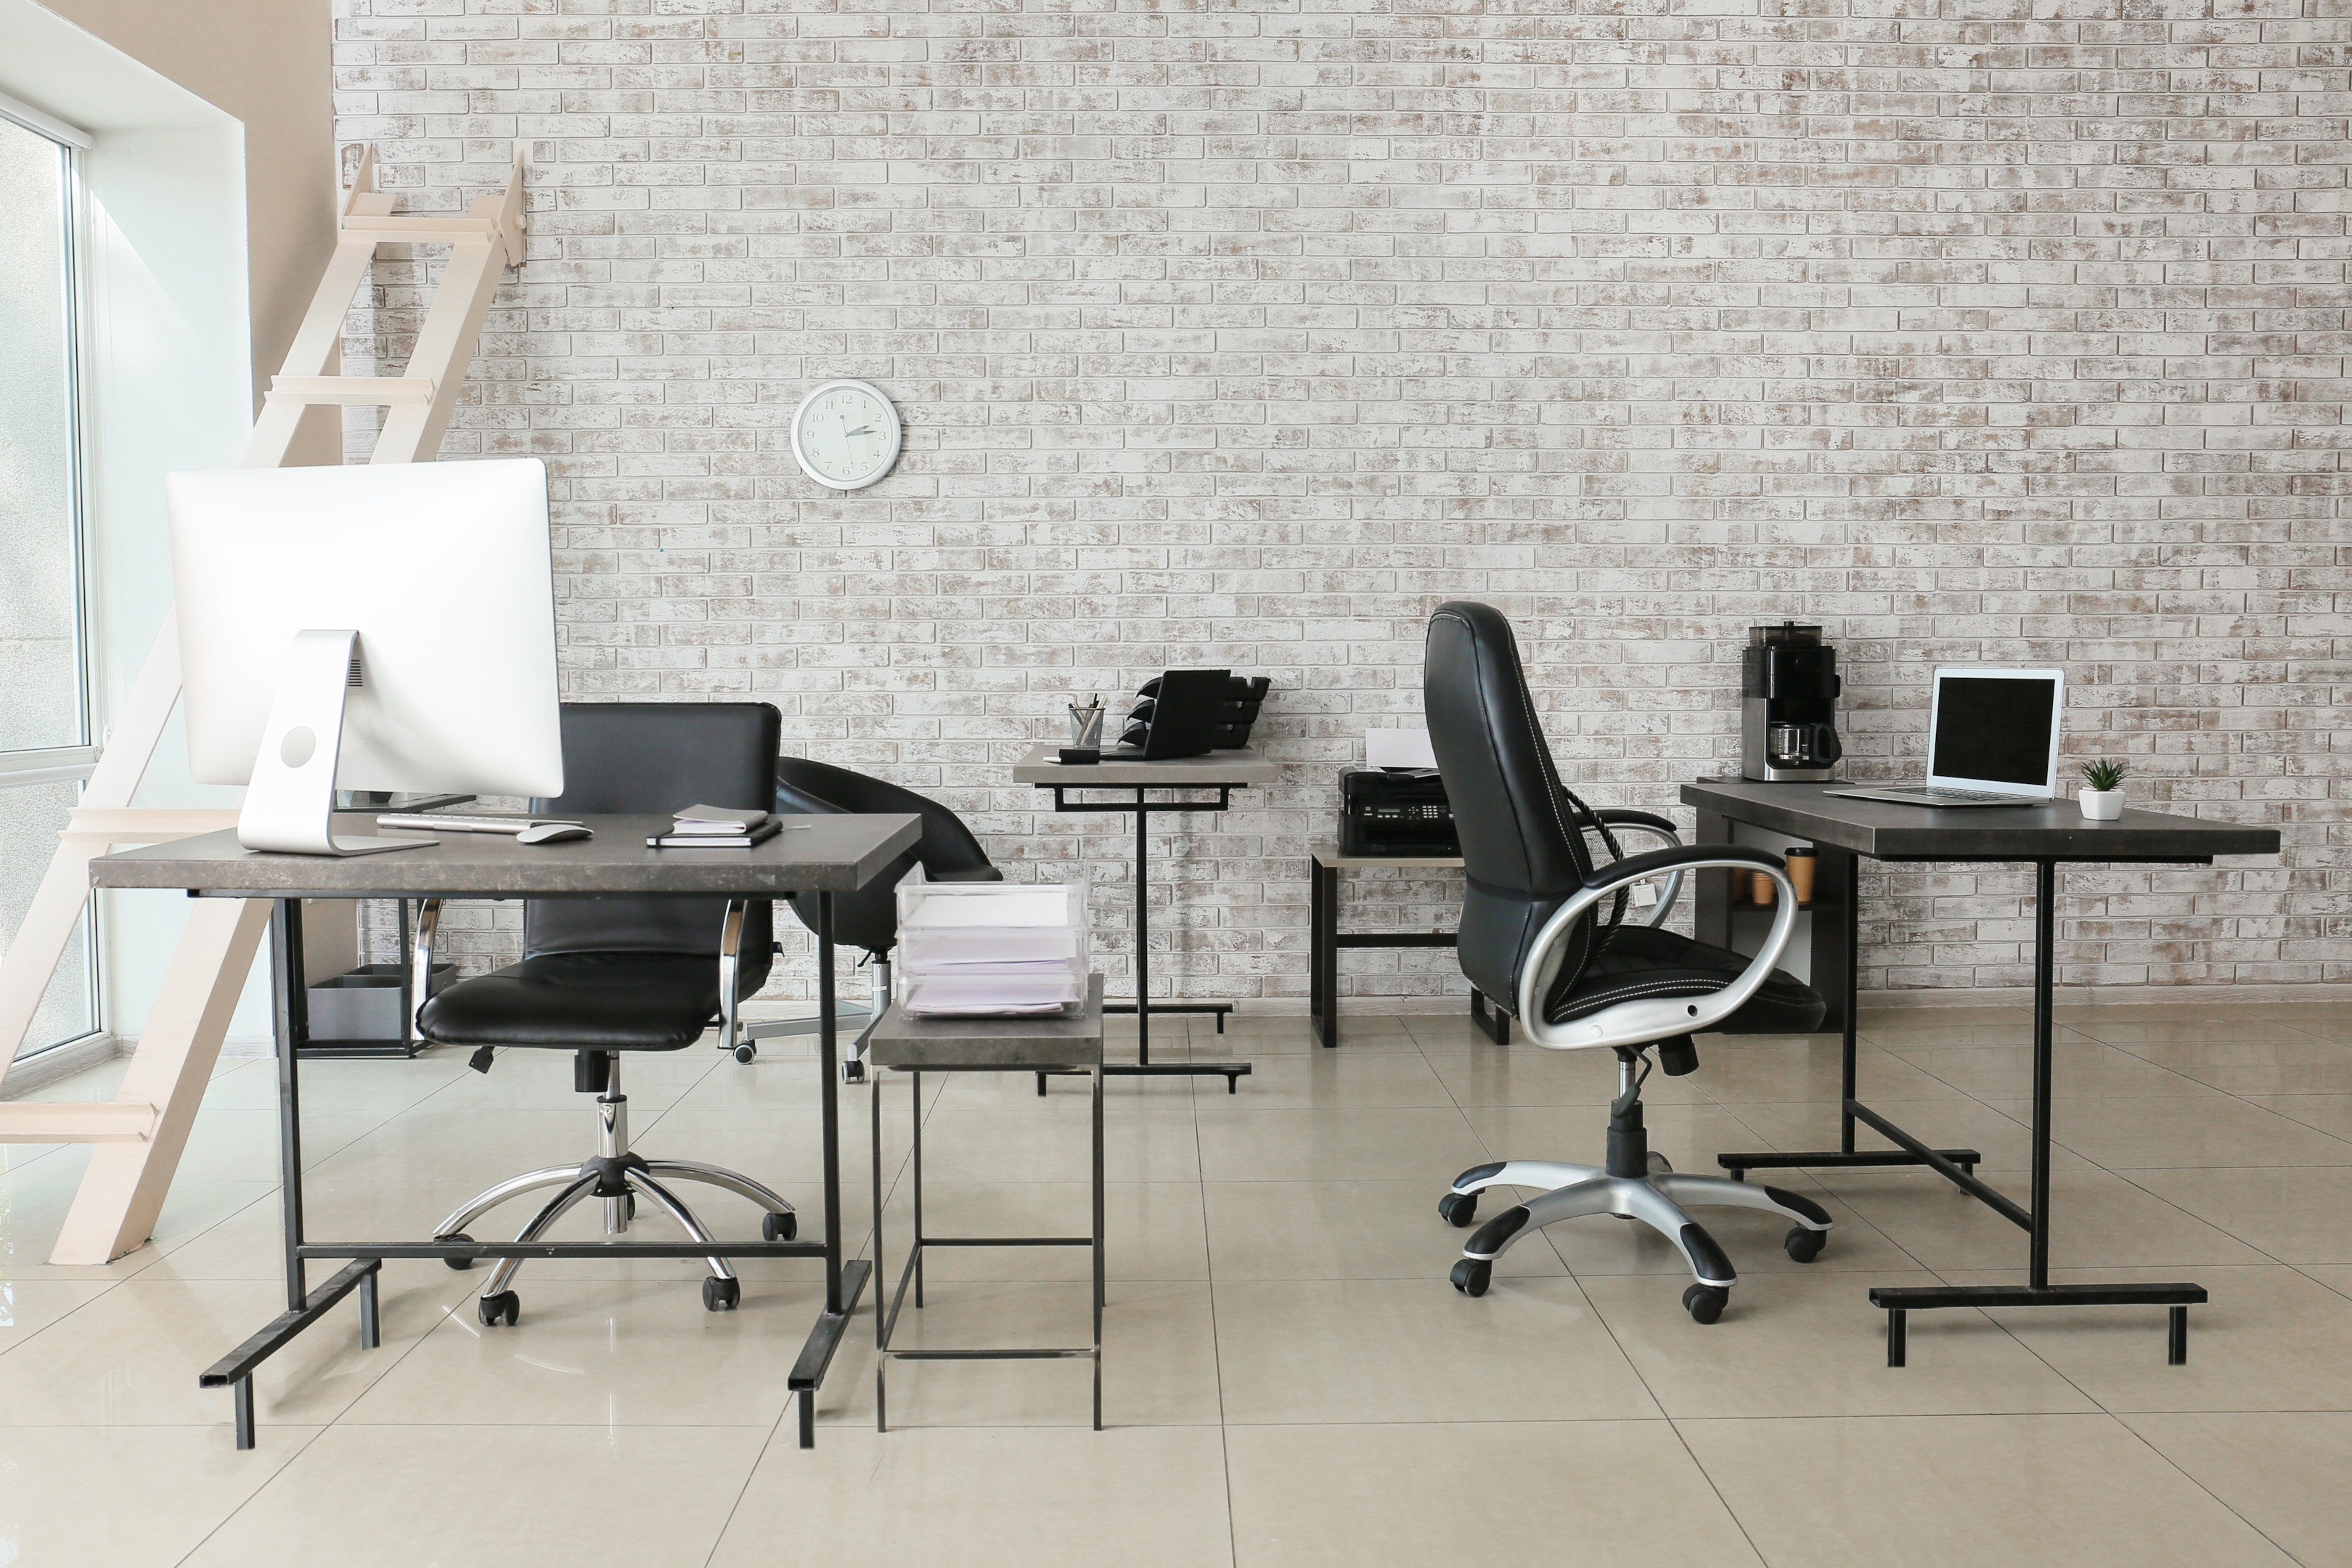 office furniture and equipment - office chair - customers - offices - stylish